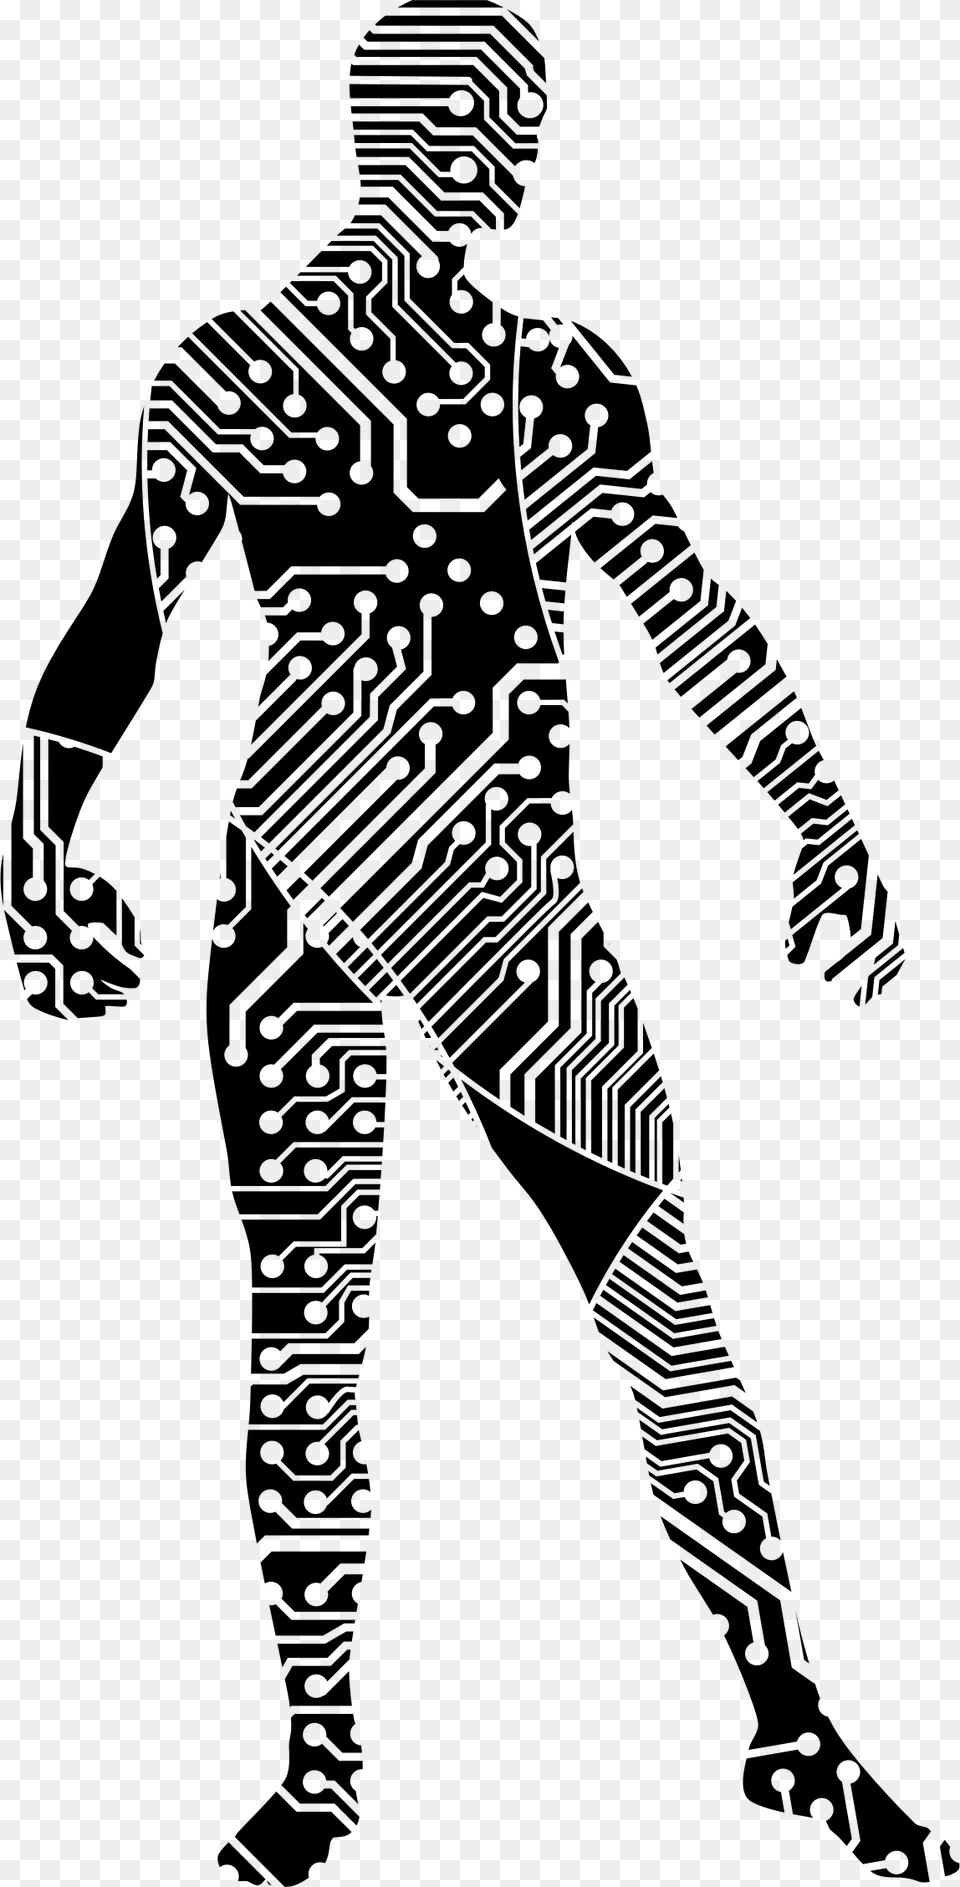 Transparent Man Working On Computer Clipart Circuit Man, Gray Png